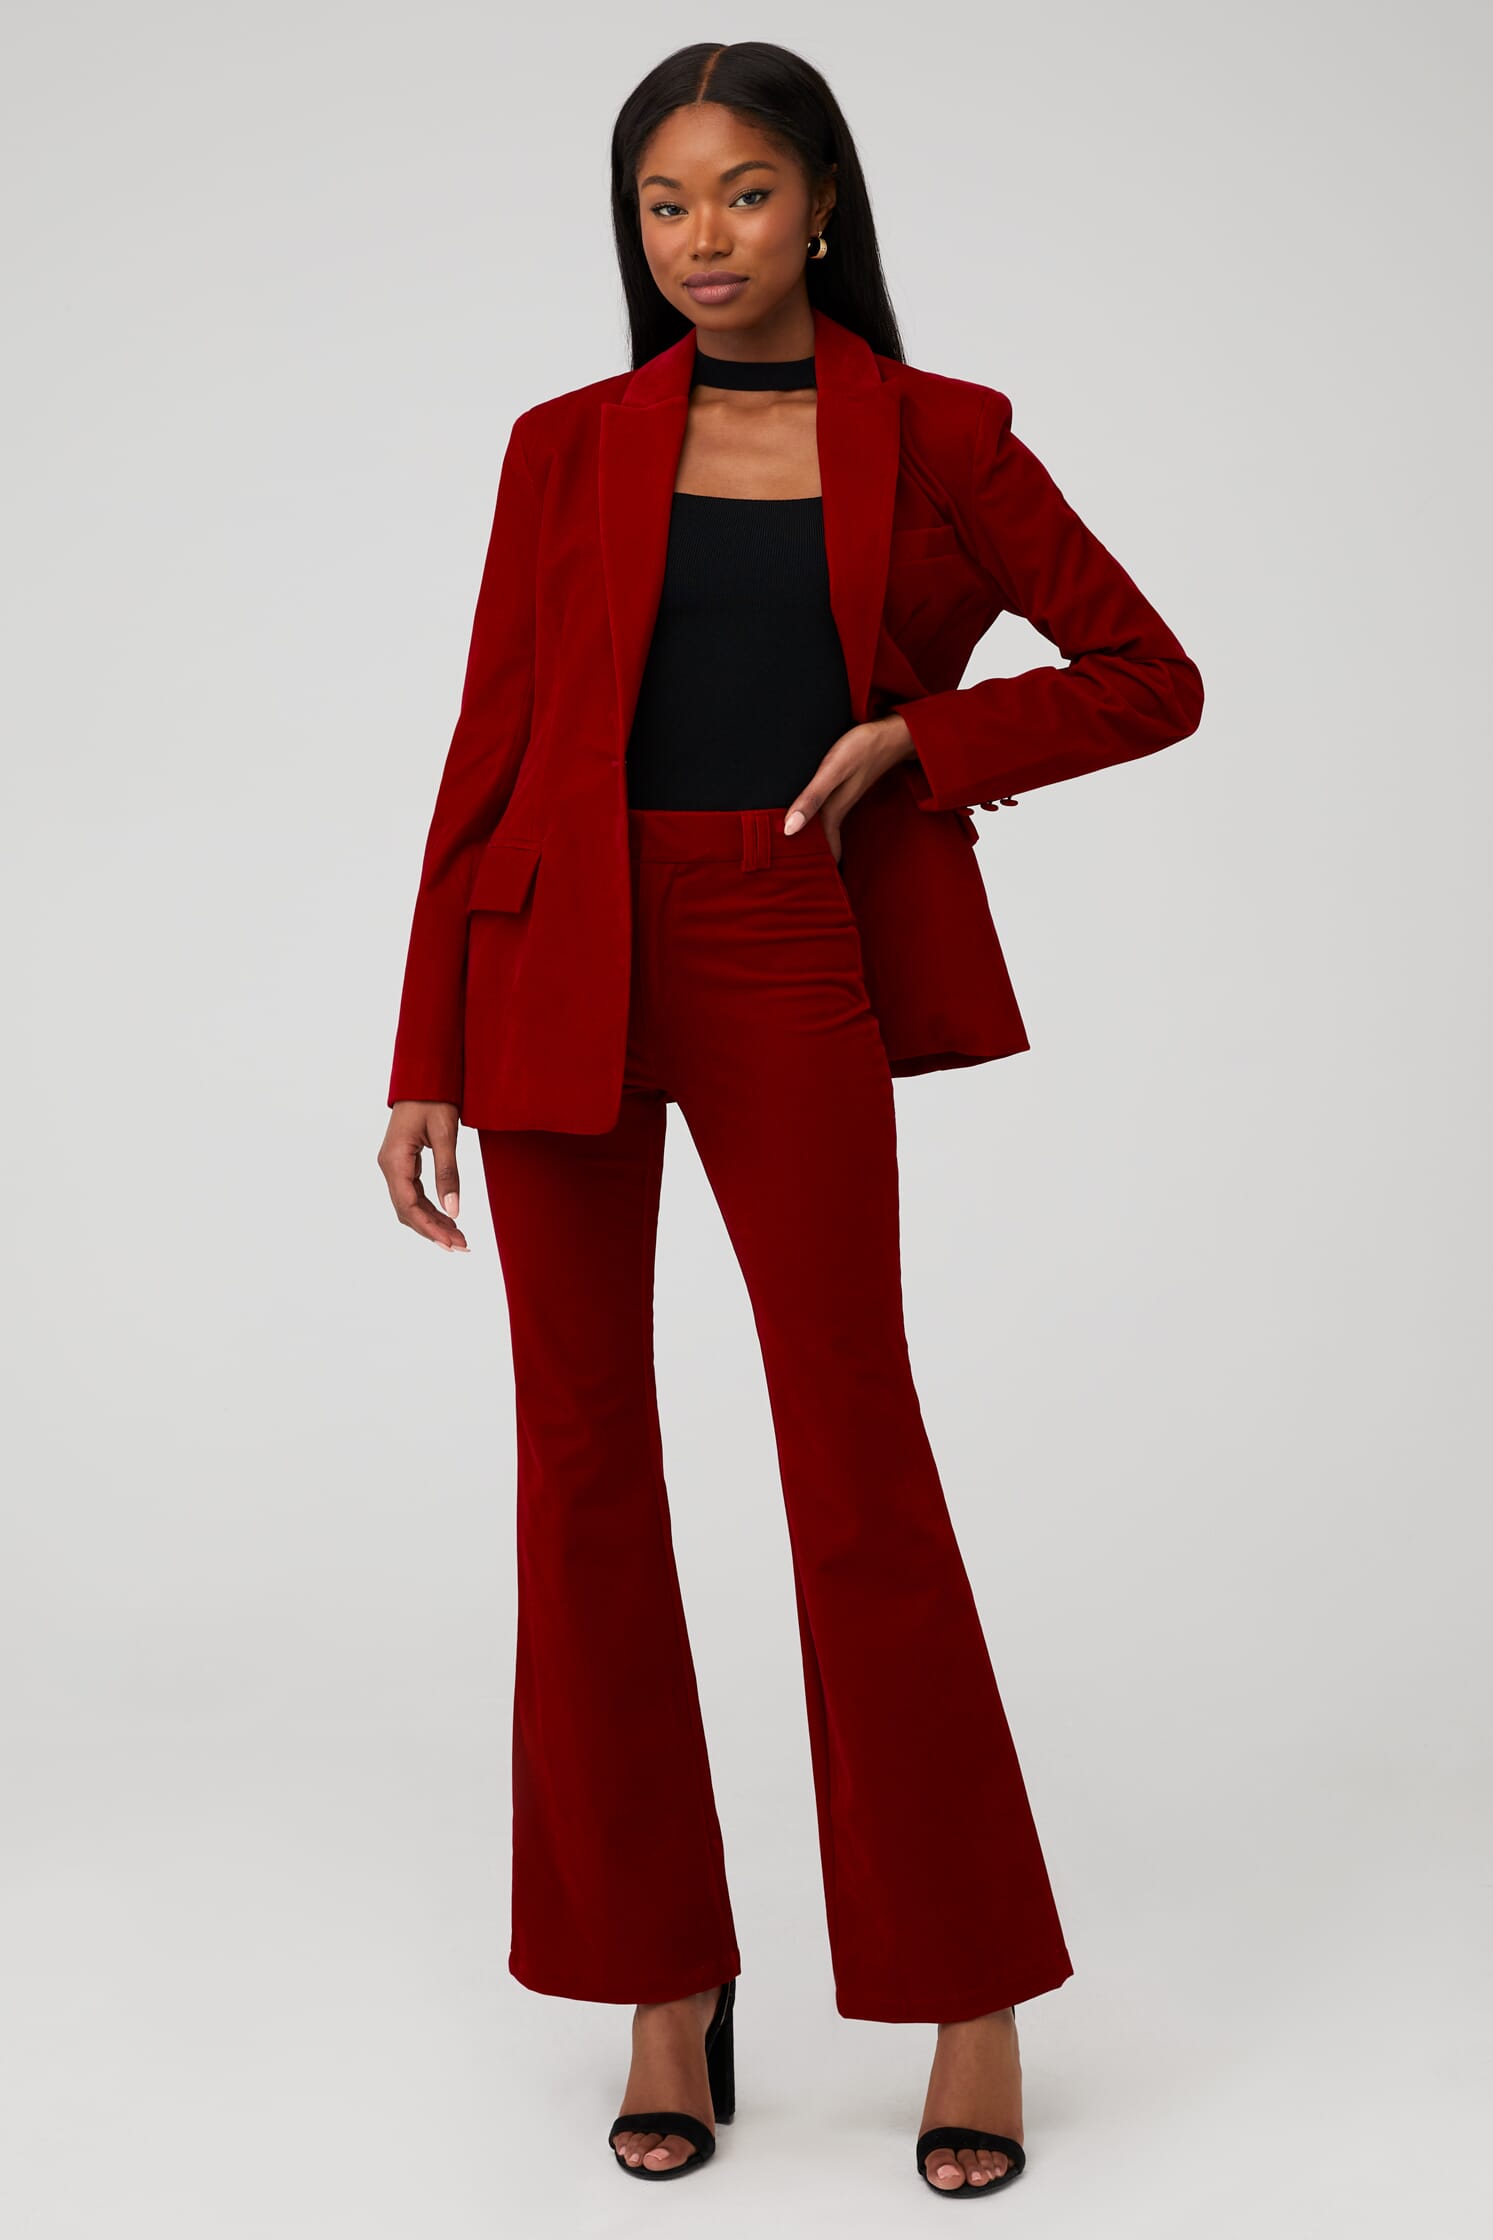 Steve Madden | Harlow Pant in Red| FashionPass